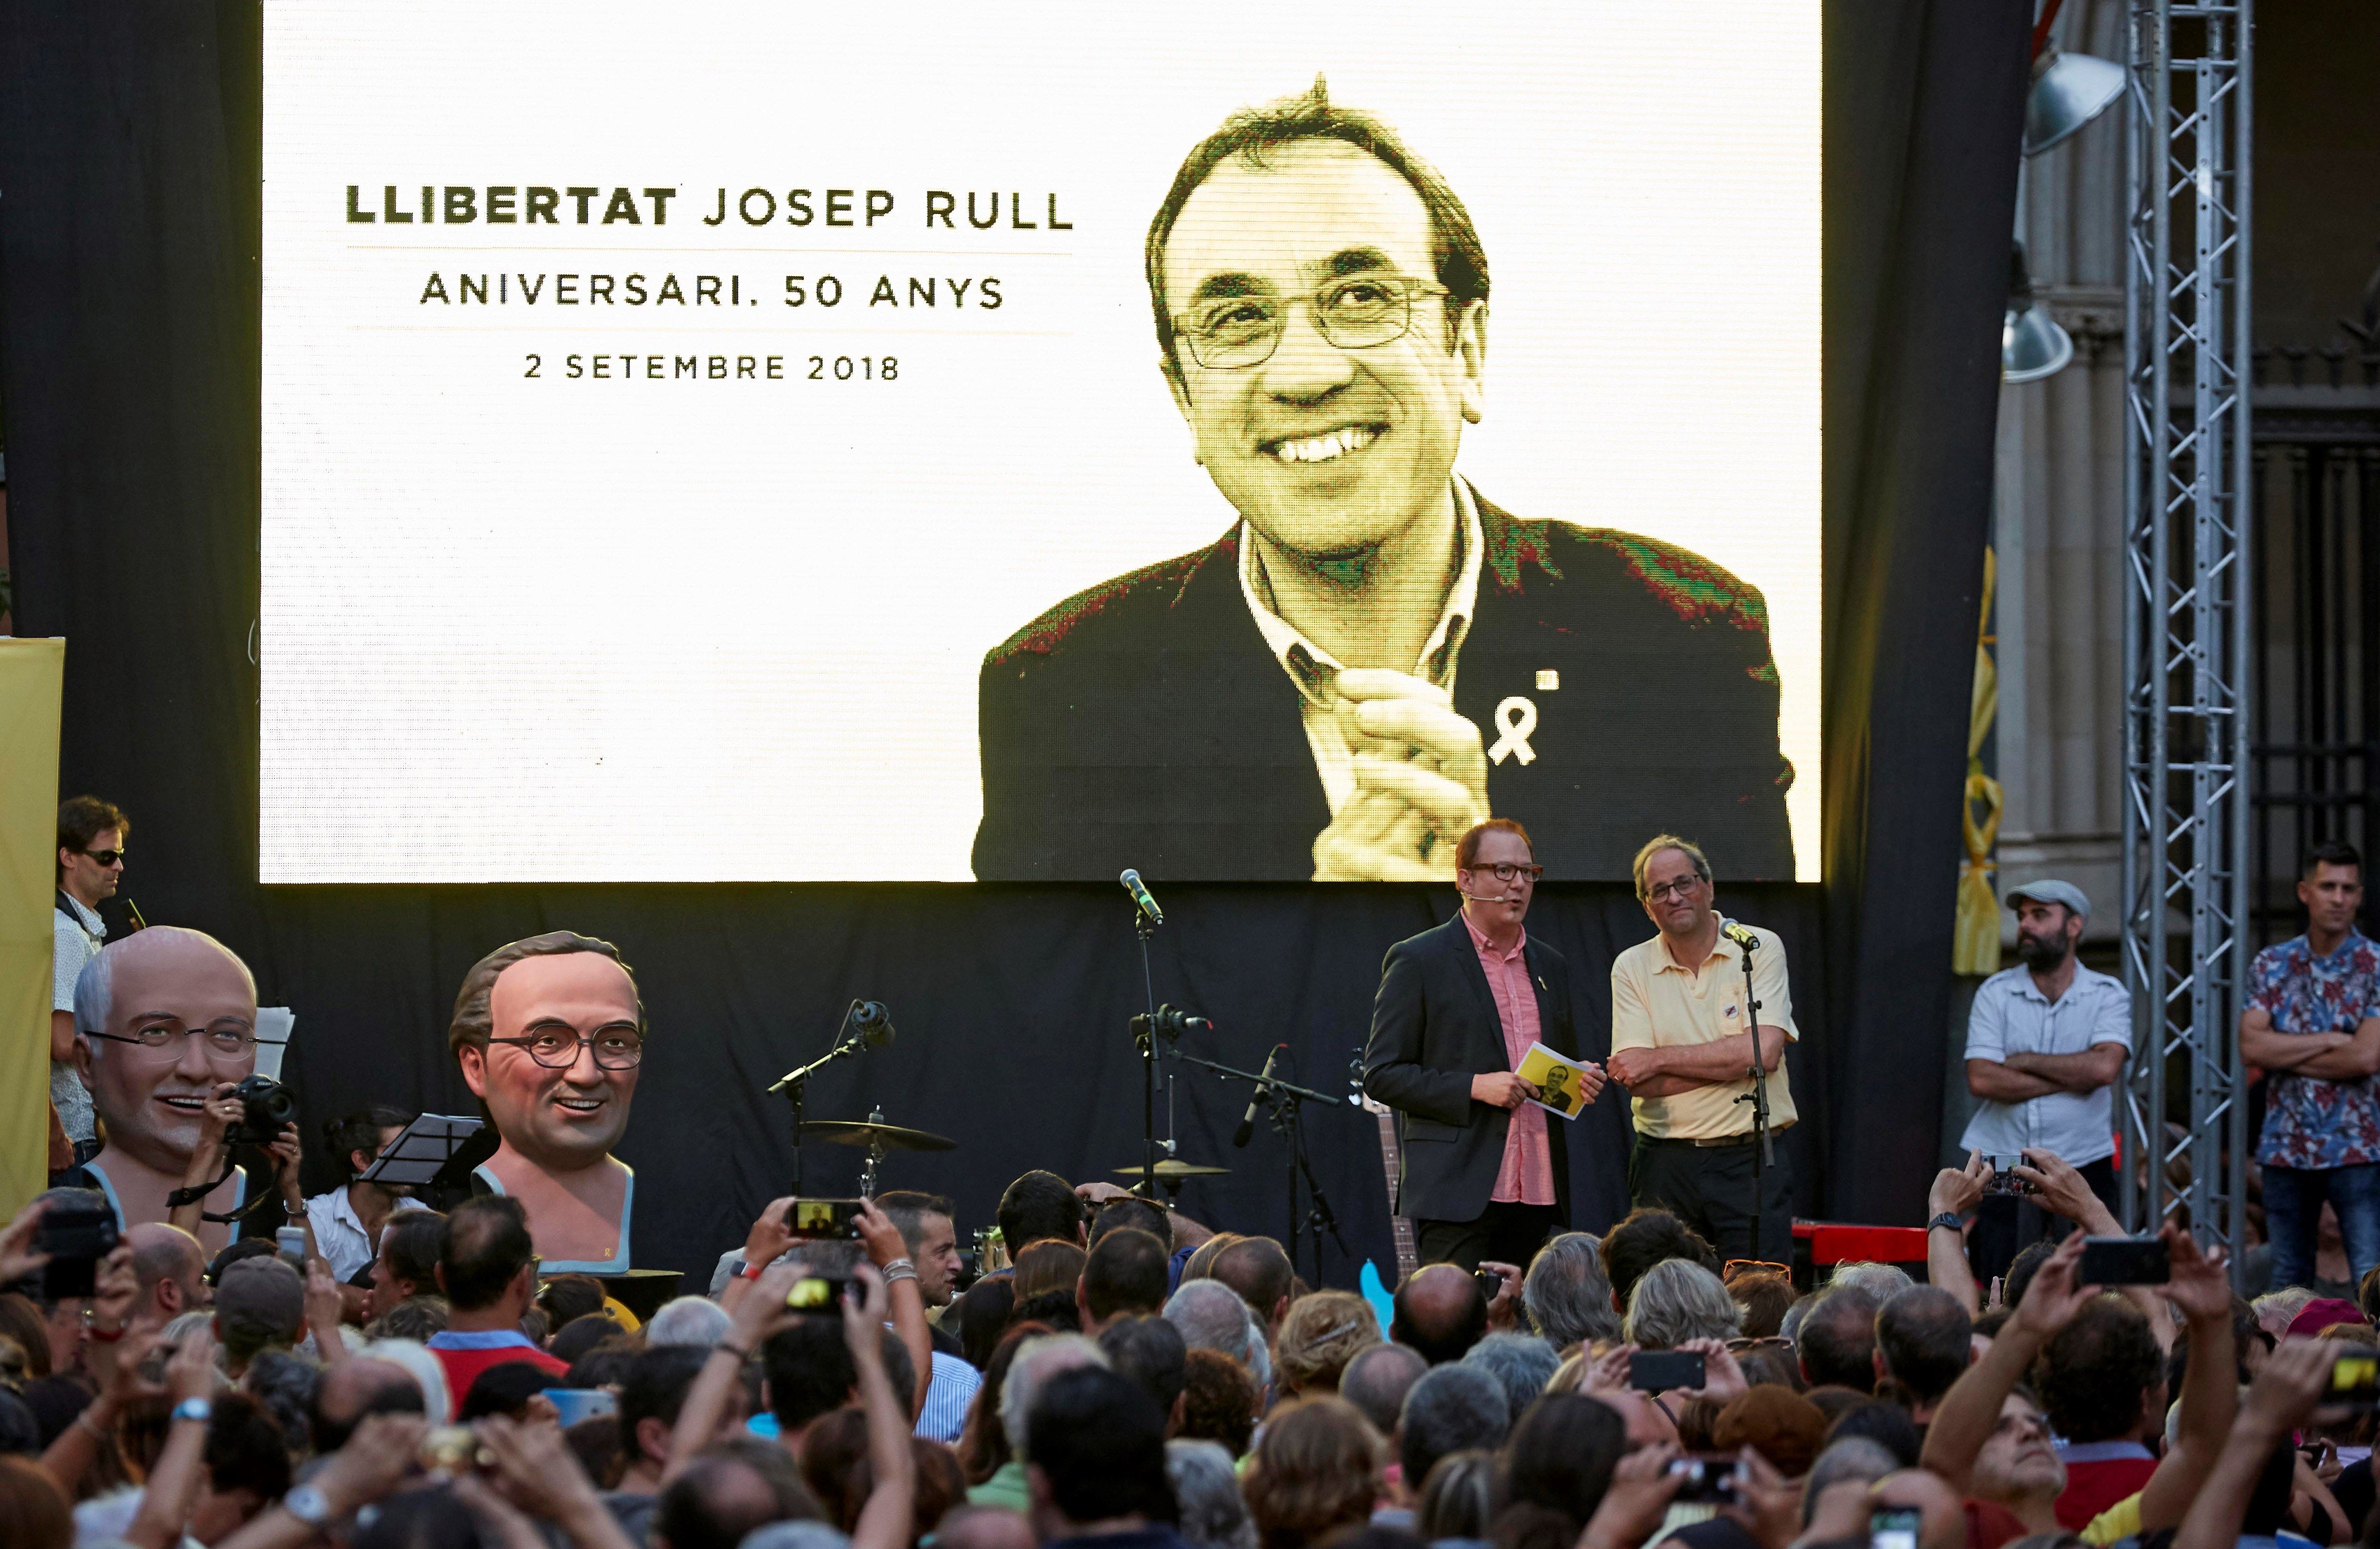 A Catalan civil rights march, proposed by Torra at homage to jailed Rull